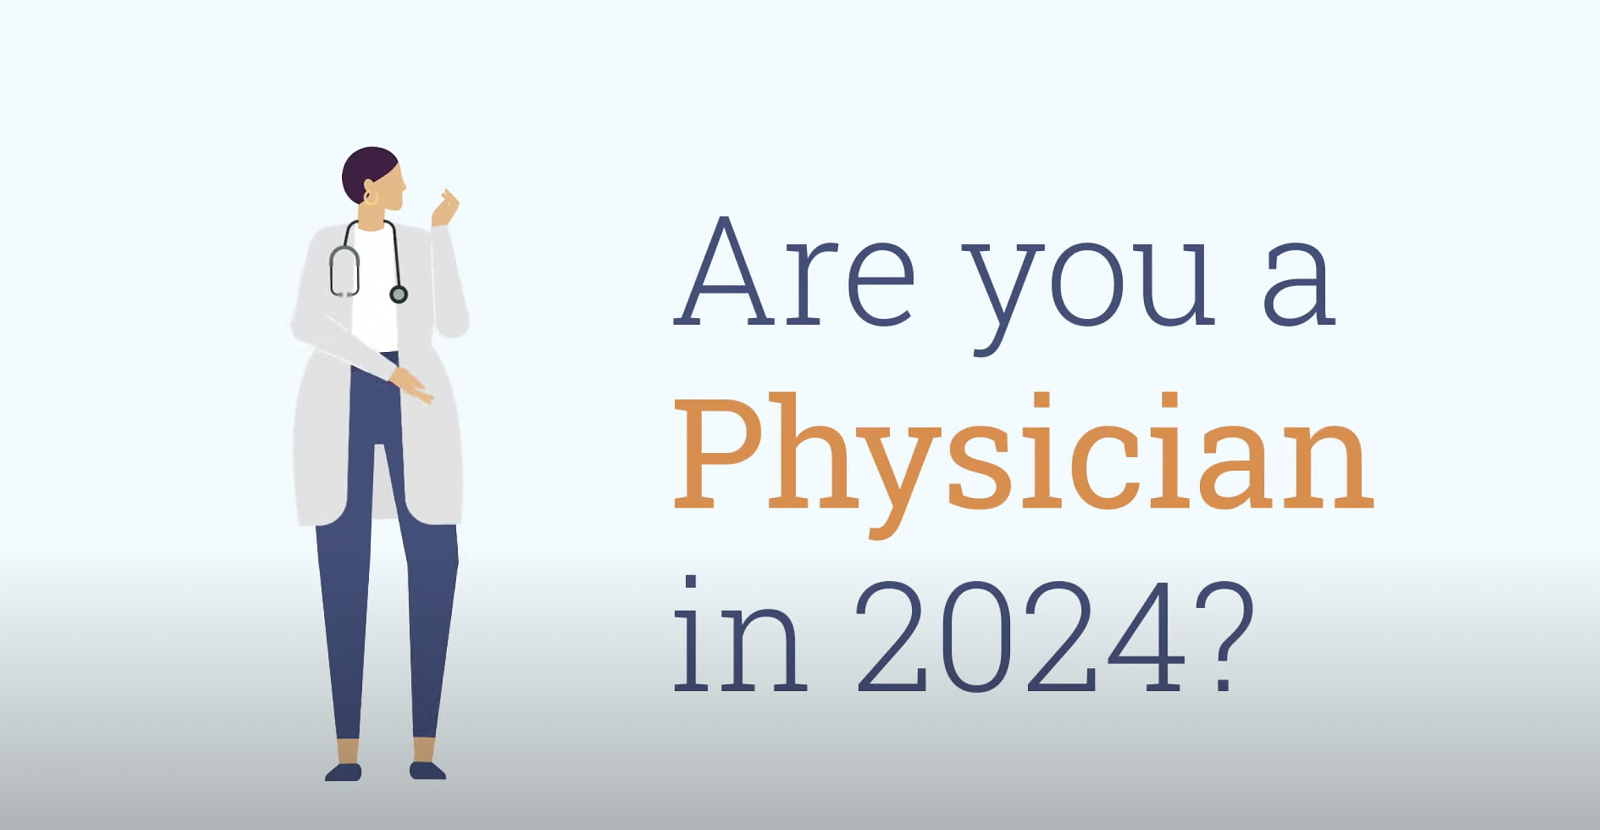 Are you a Physician in 2024?